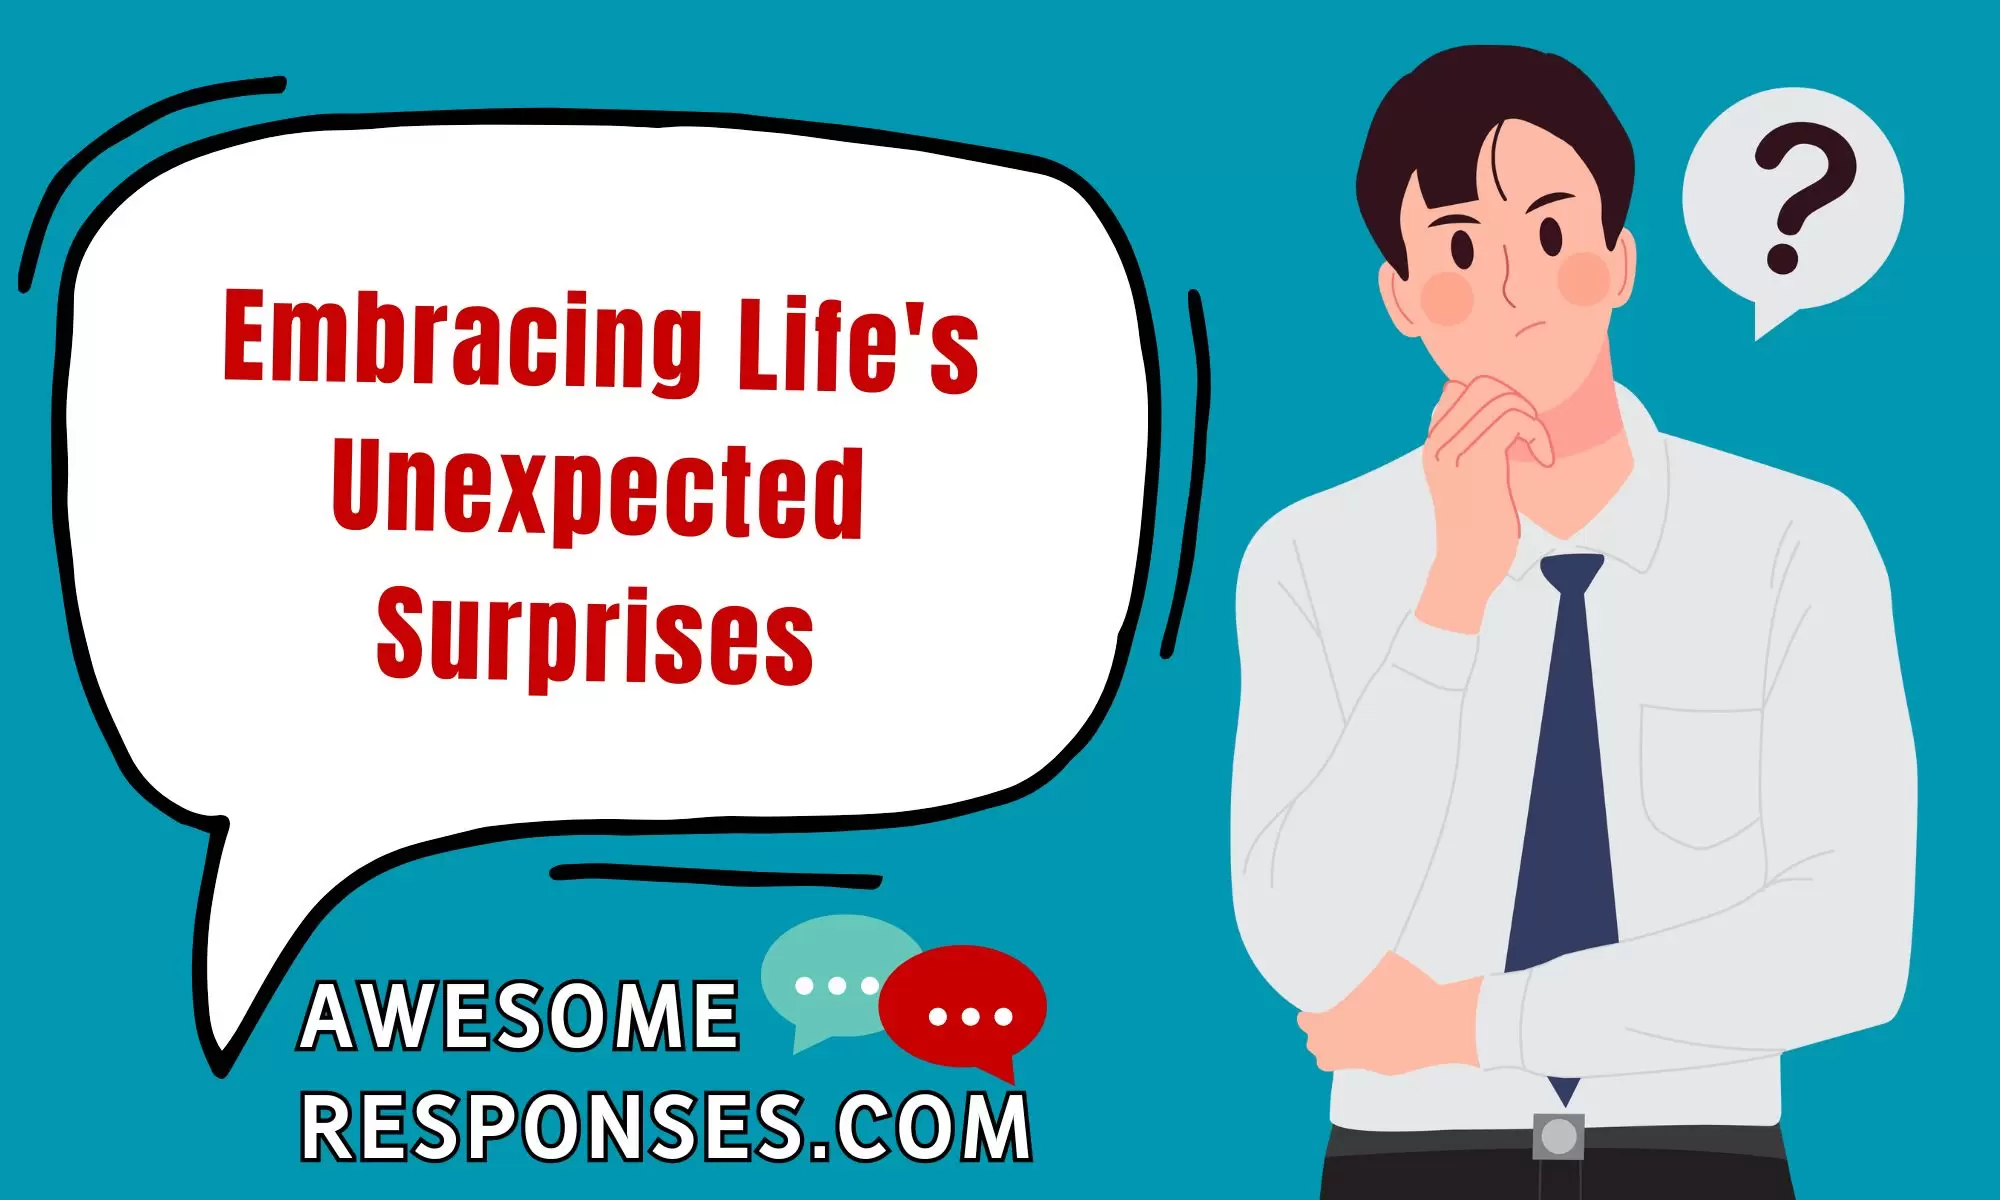 Embracing Life's Unexpected Surprises